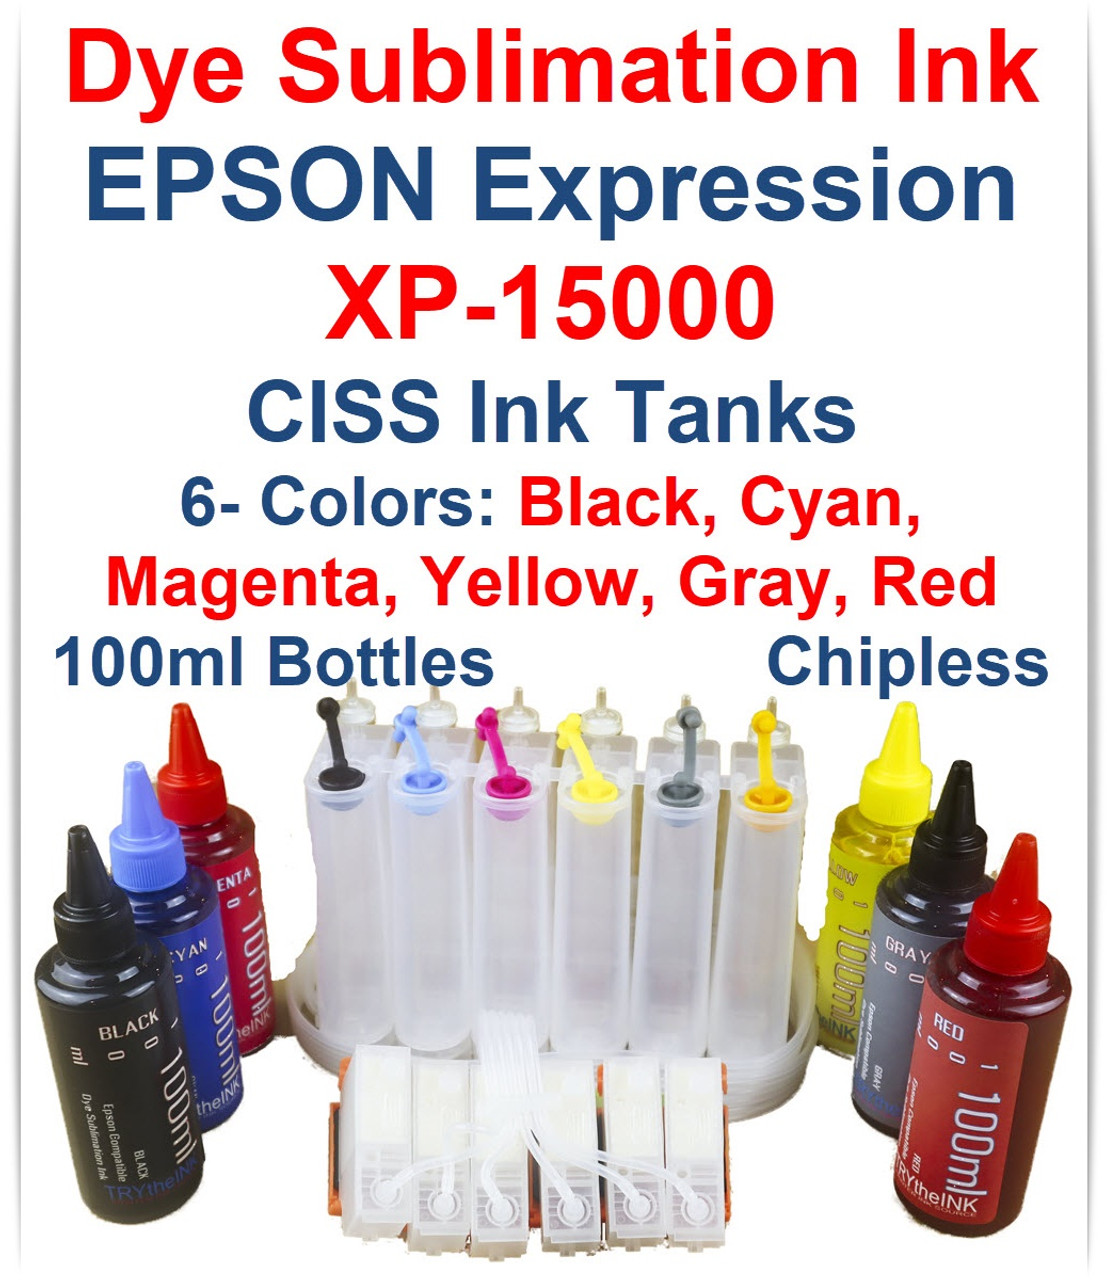 Dye Sublimation Ink 6- 100ml Bottles, CISS Chipless Ink Tank for Epson Expression Photo HD XP-15000 Printer
6 100ml bottles Dye Sublimation Ink: Black, Cyan, Magenta, Yellow, Gray, Red